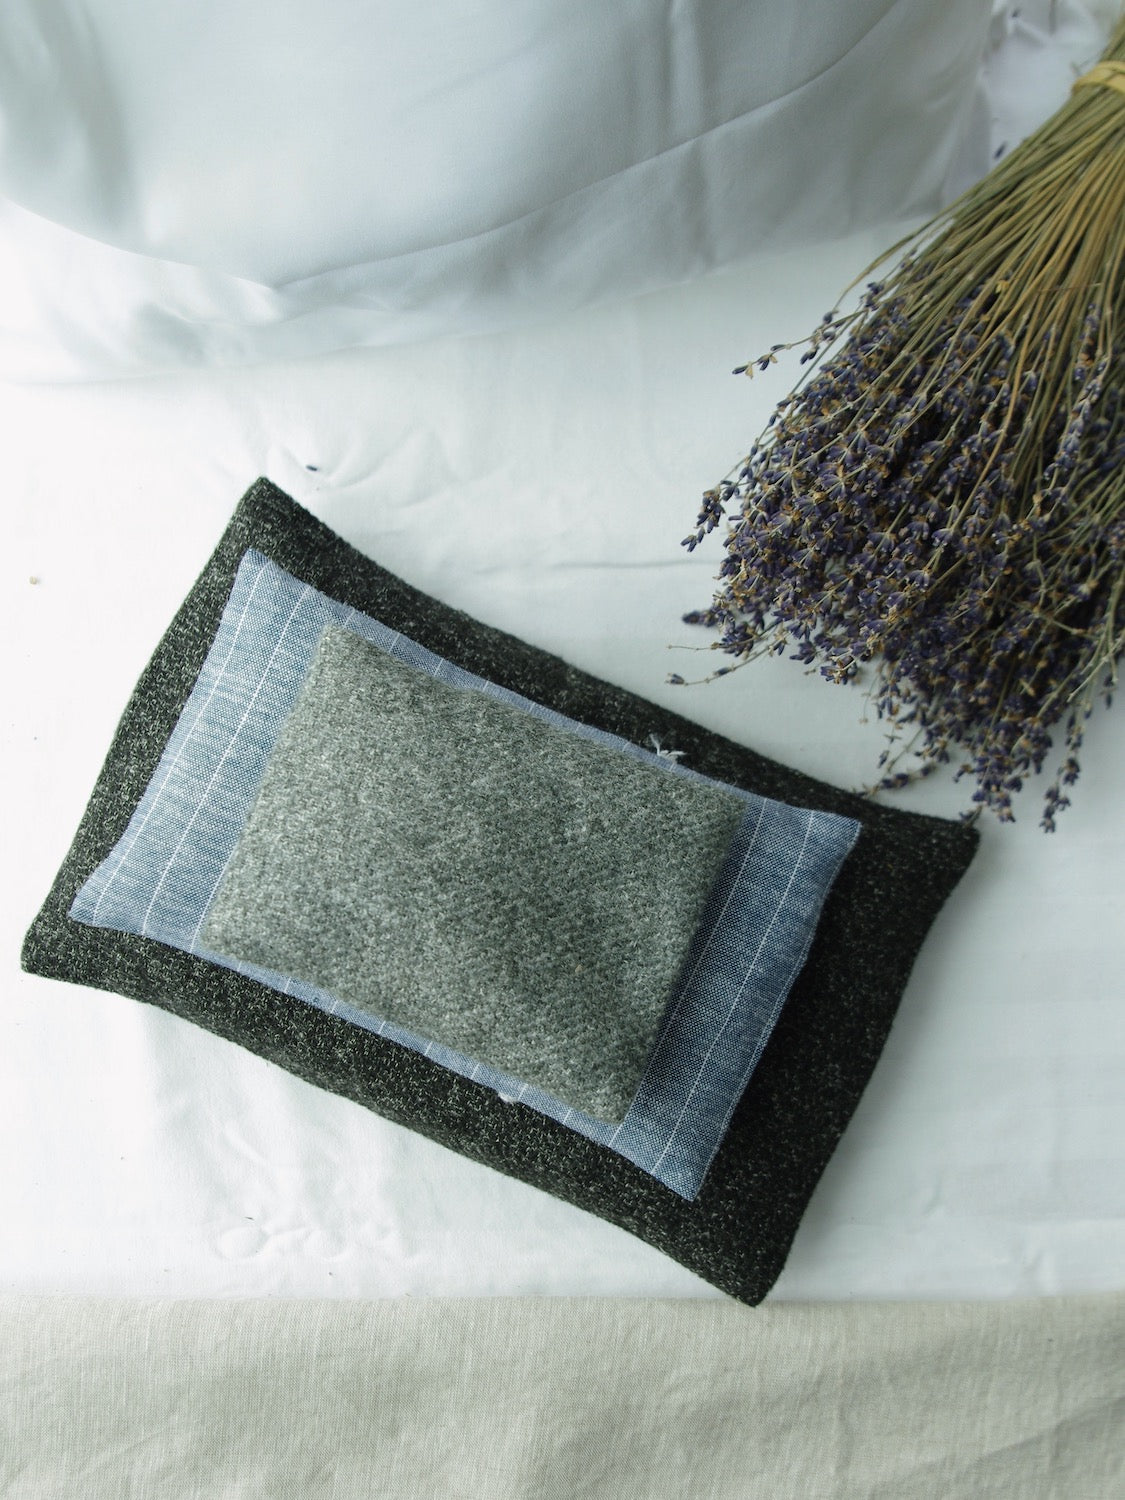 French Dry Goods Lavender Sachet Pouch - Grey Wool French Dry Goods Brand_French Dry Goods Home_Decor Home_French Nostalgia Home_Gifts Home_Provençal Style New Arrivals new arrivals 2023 lavender-sachet-linen-pouches-french-dry-goods_DBD5DA4D_1124x1500_cf342659-18b7-4053-bbae-d9fcb827ad35